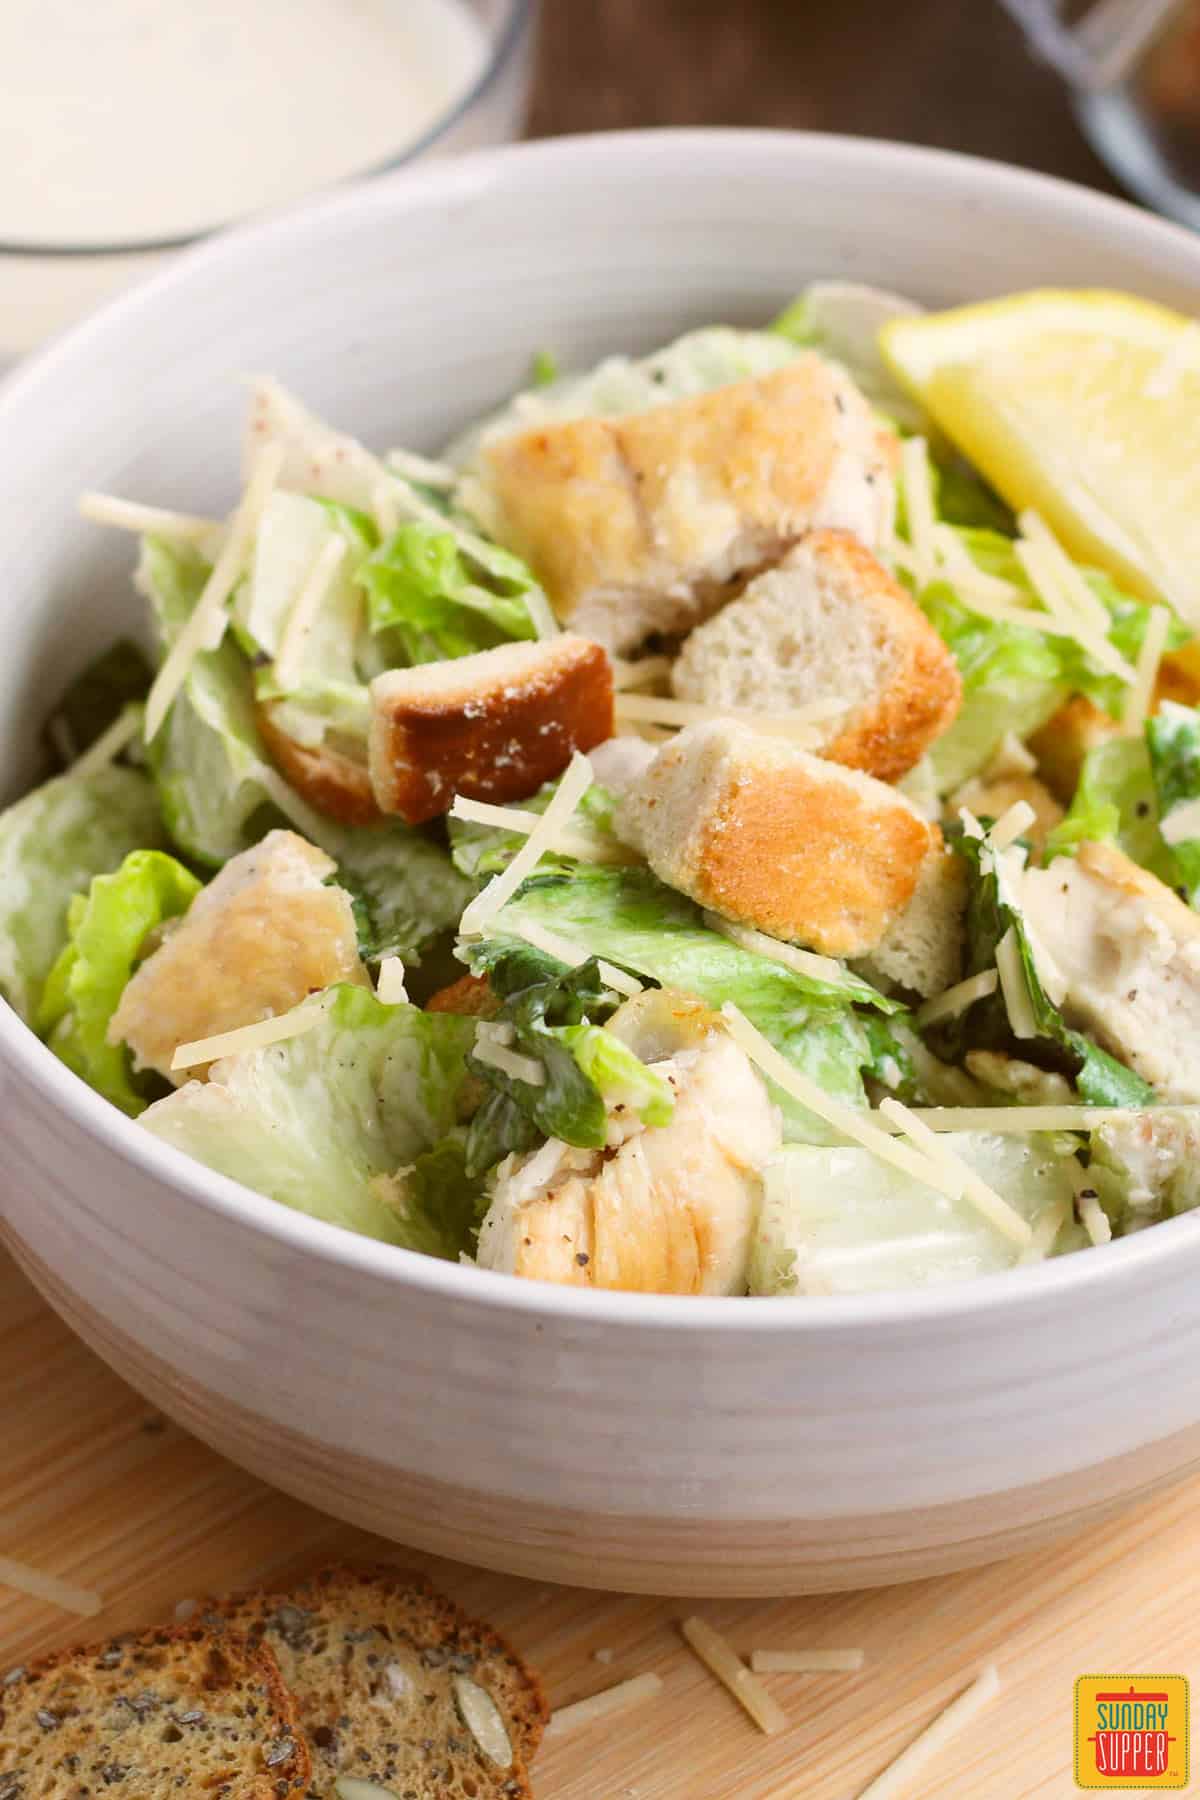 a dish of caesar salad on a cutting board with bread slices